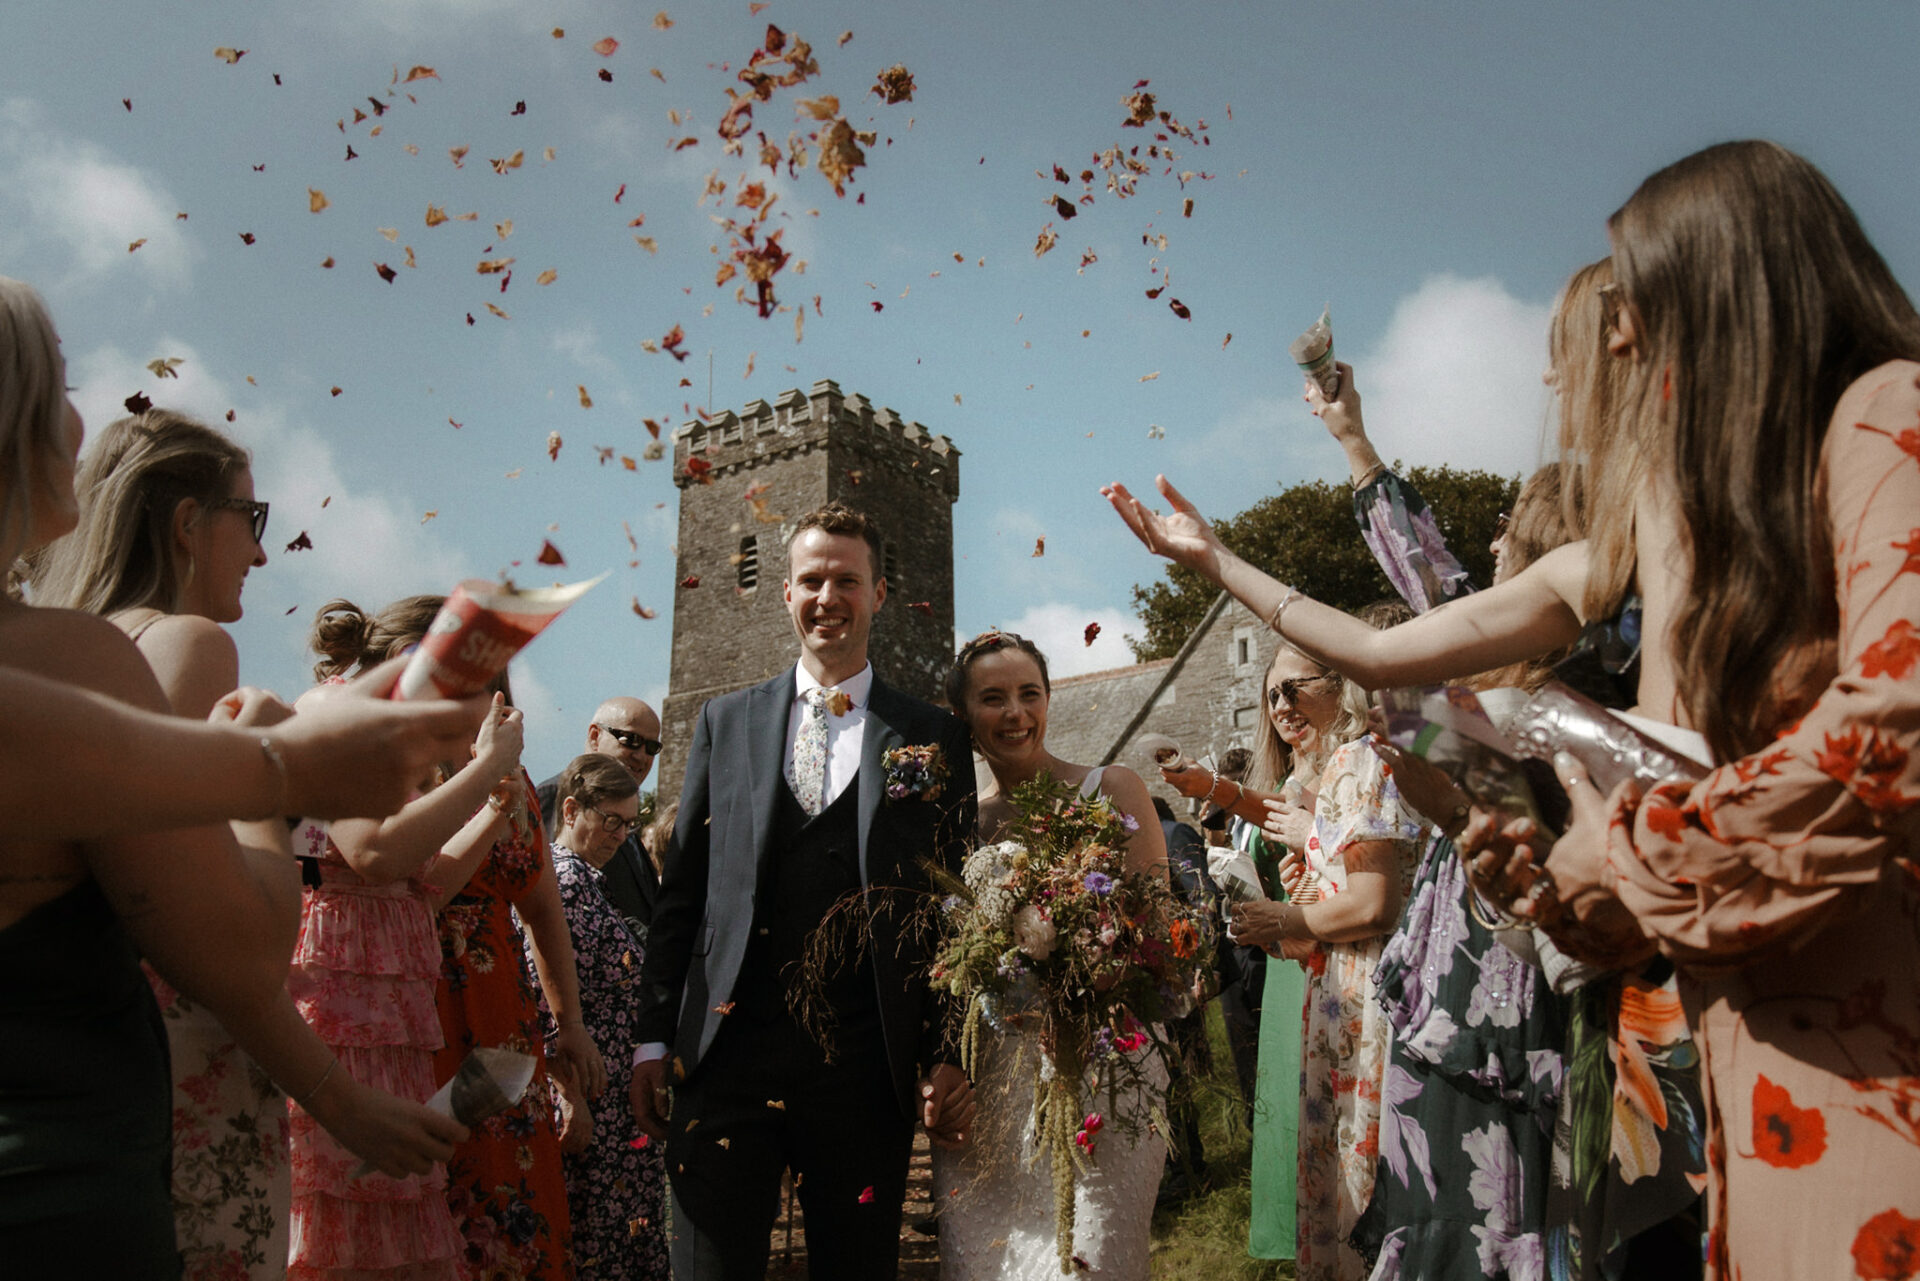 Wedding guests throwing flower petals at smiling bride and groom on a sunny day.